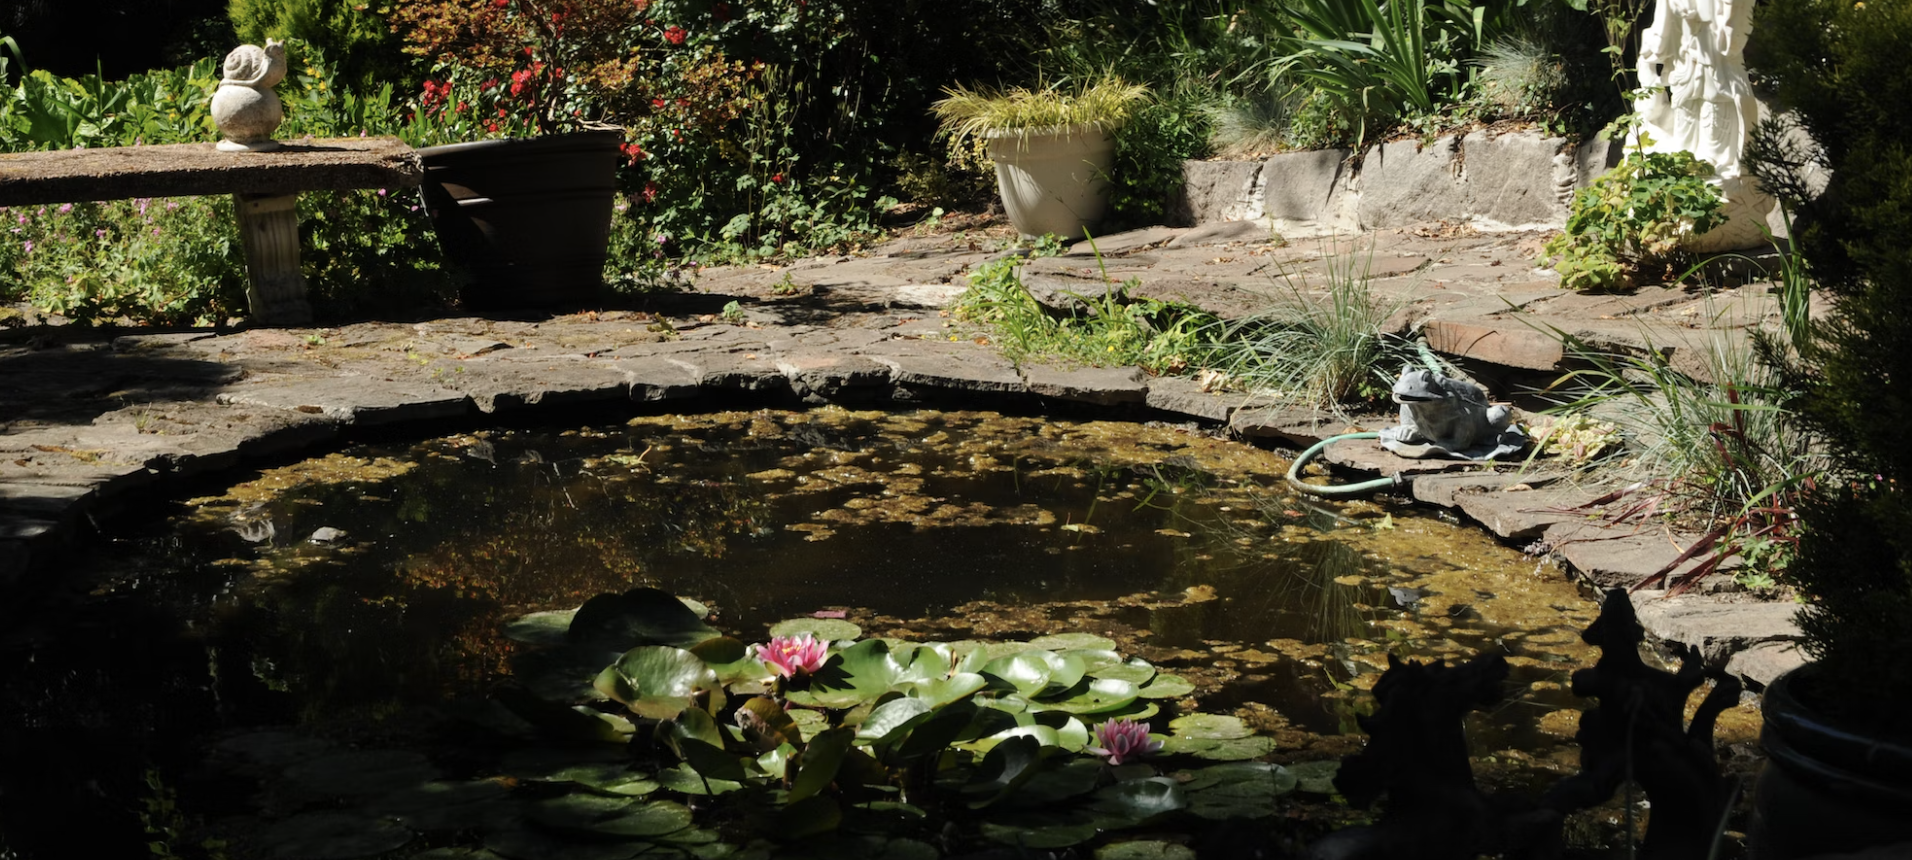 Photo of a sunken garden pond with lilies